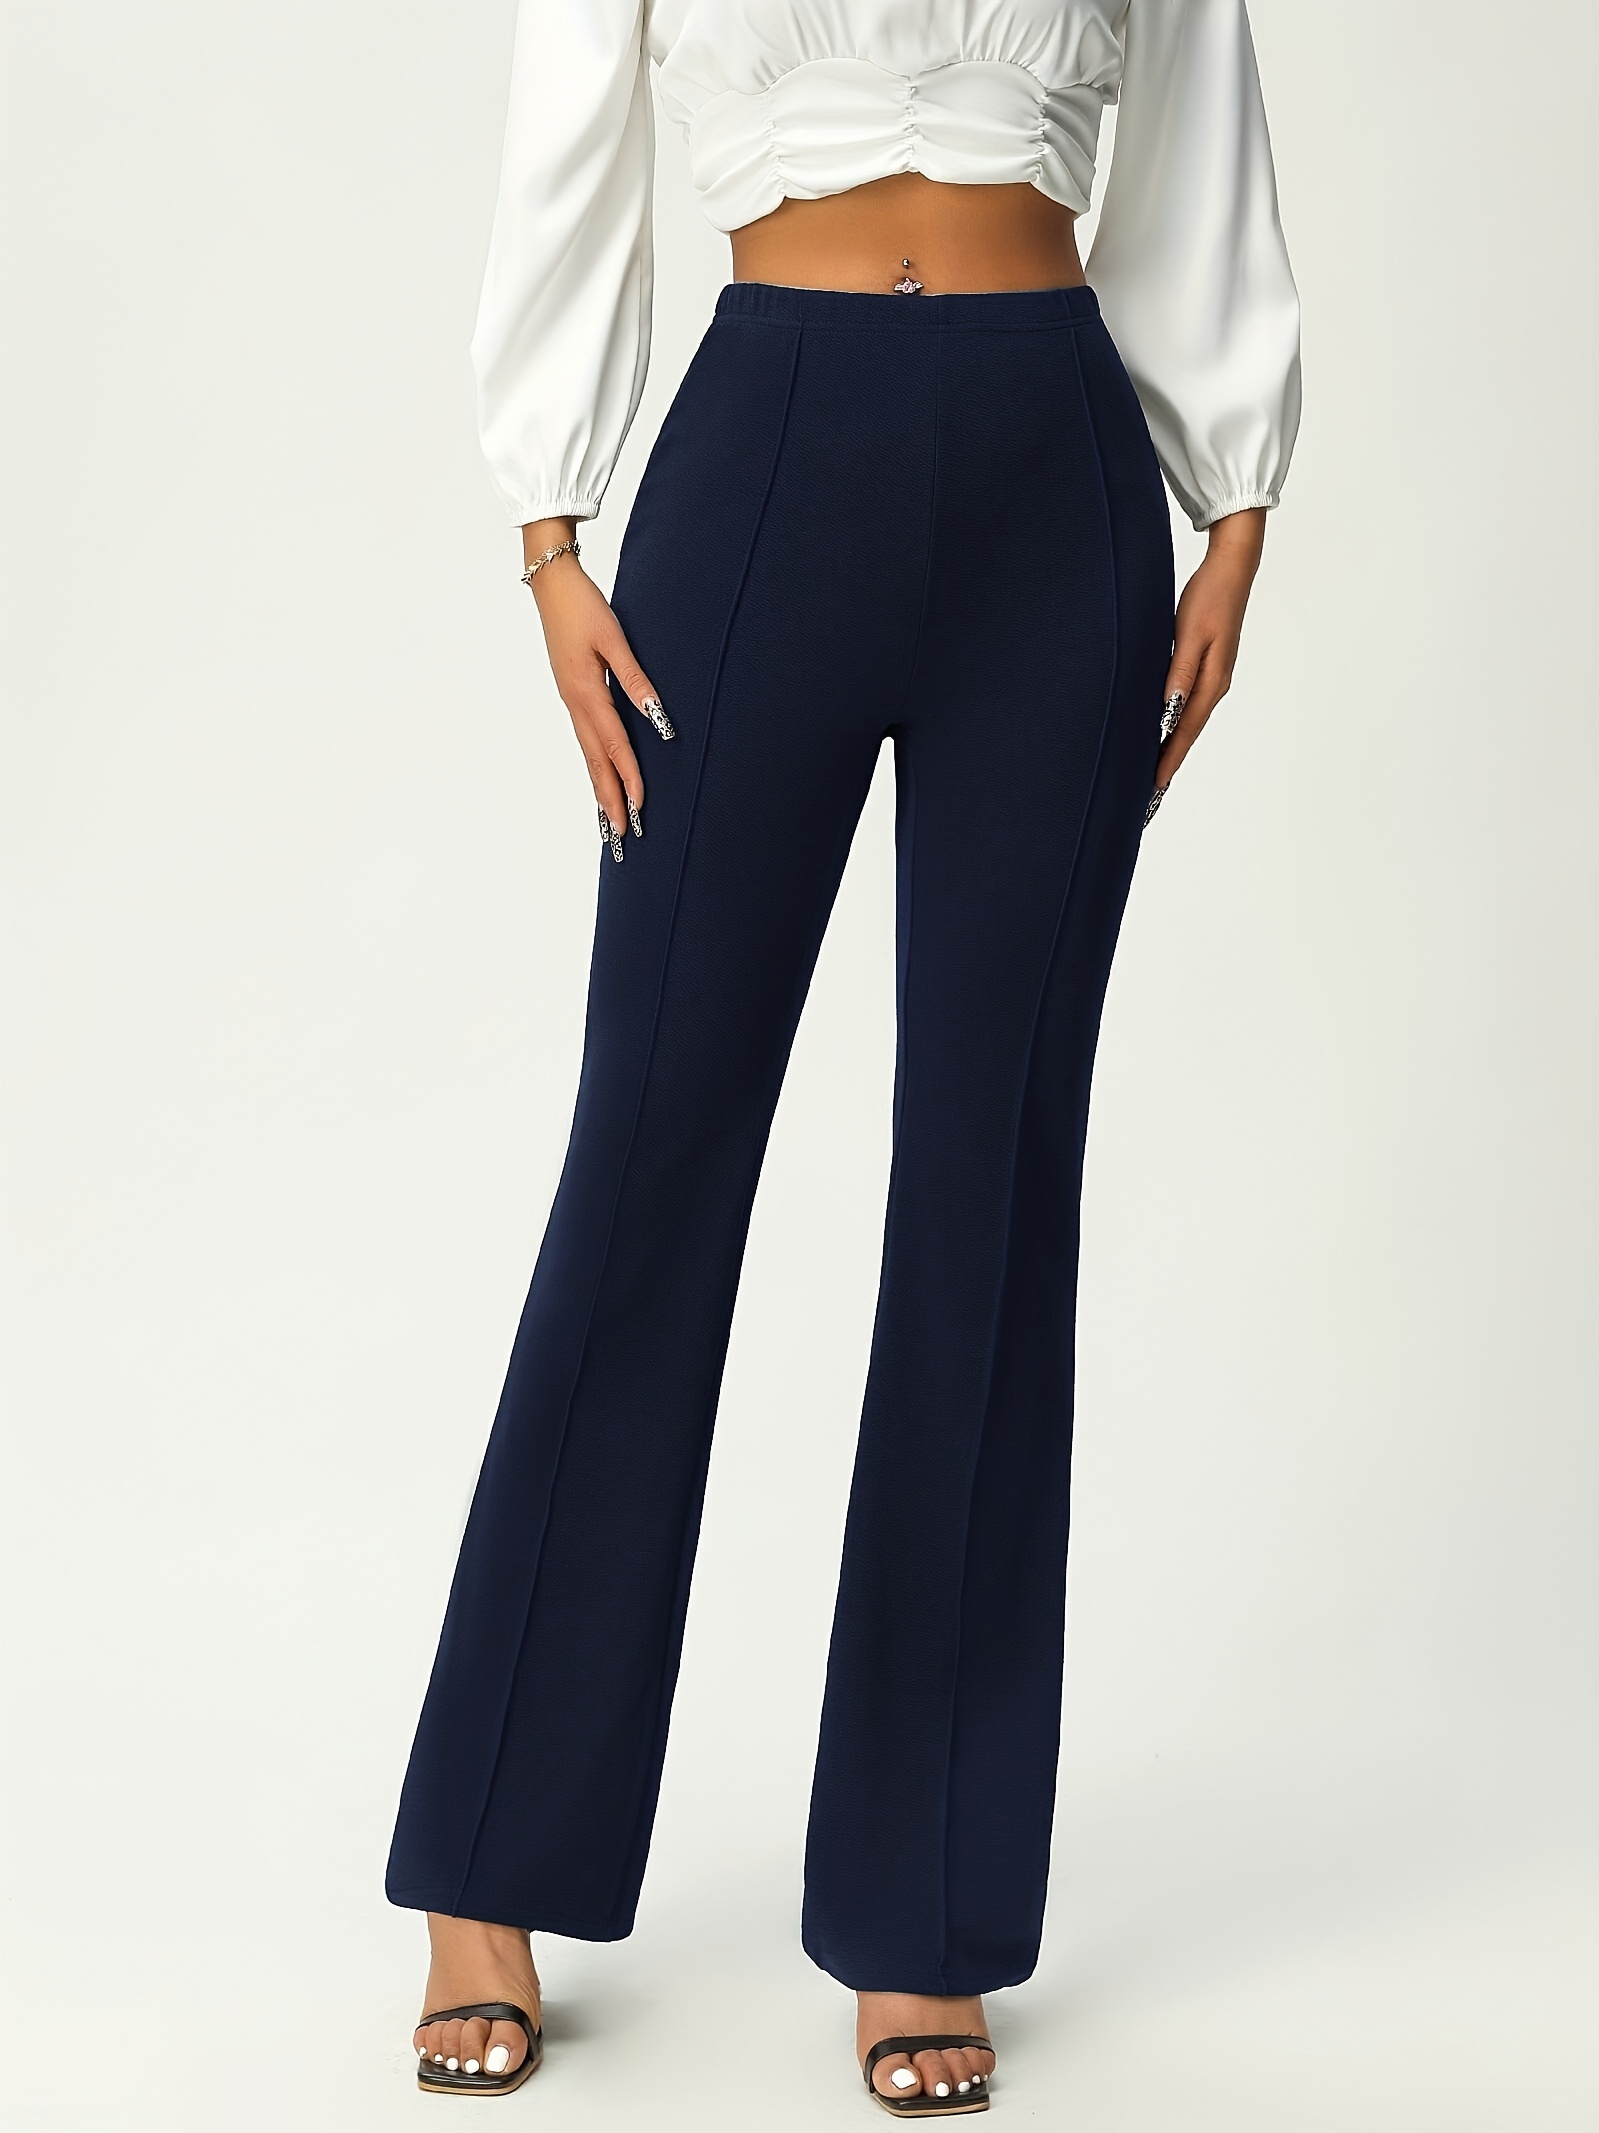 solid flare leg pants elegant stretchy high waist pants for work office womens clothing